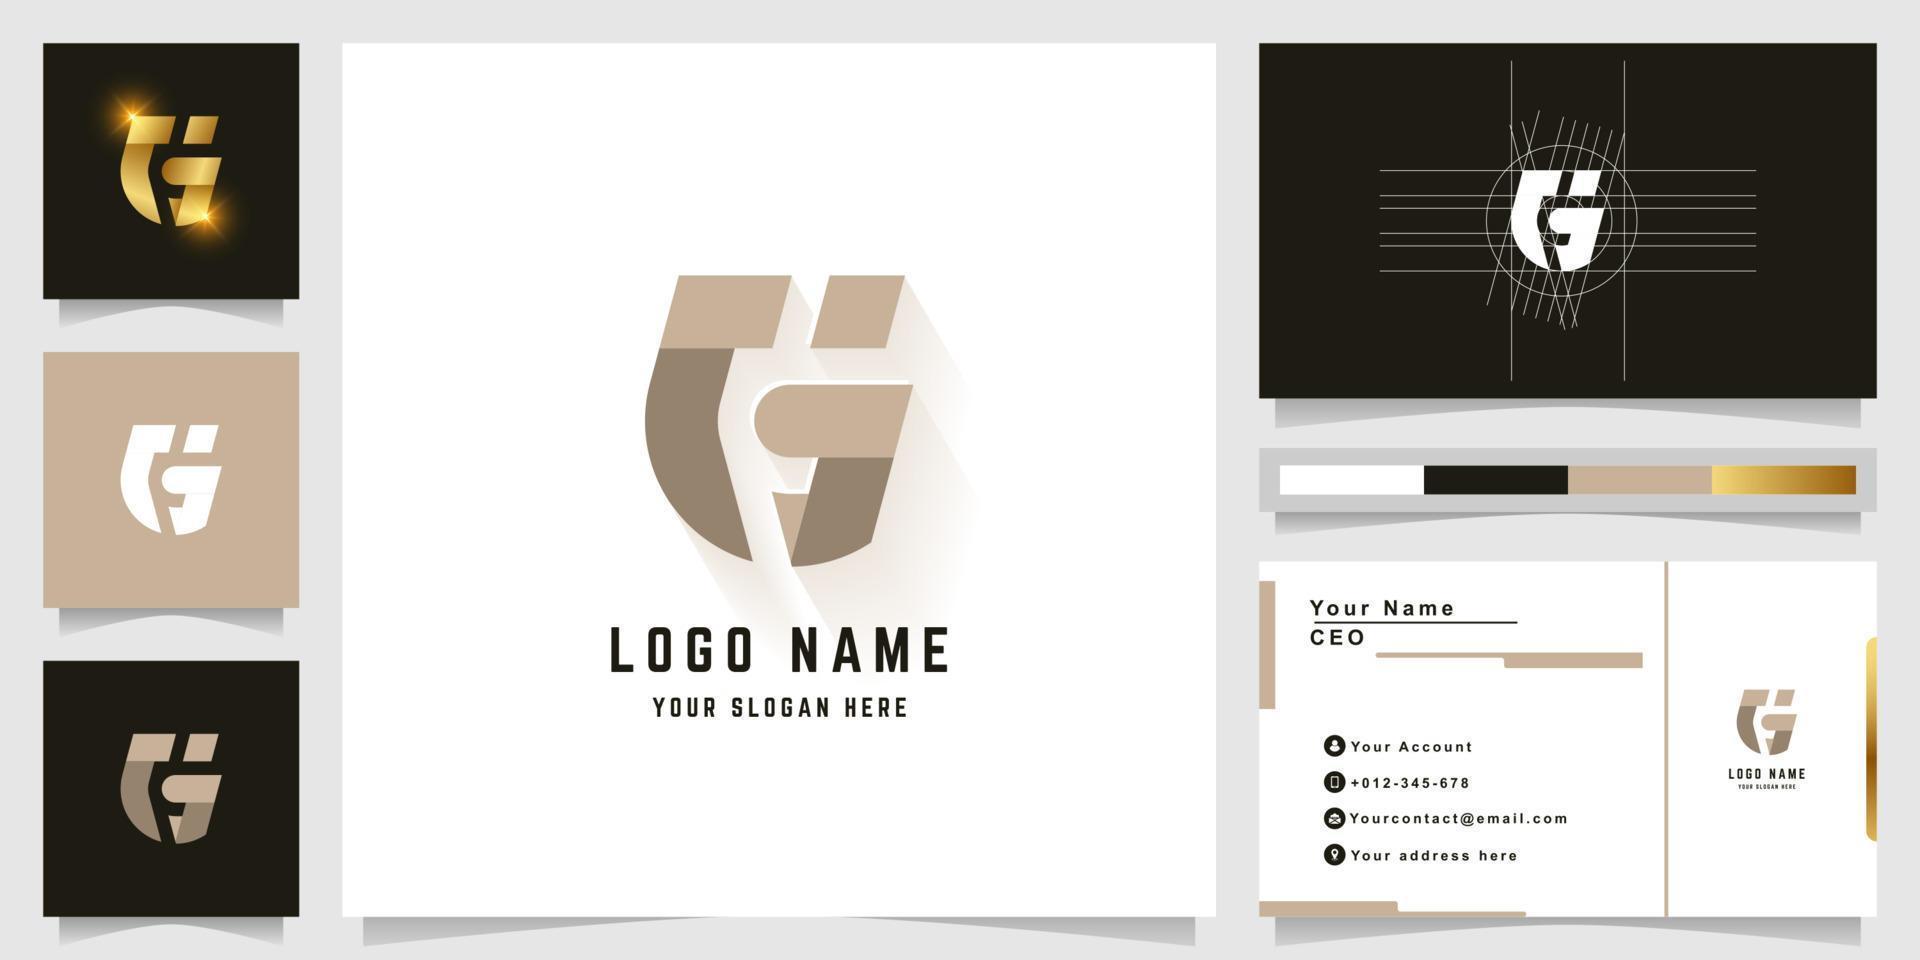 Letter G or CG monogram logo with business card design vector